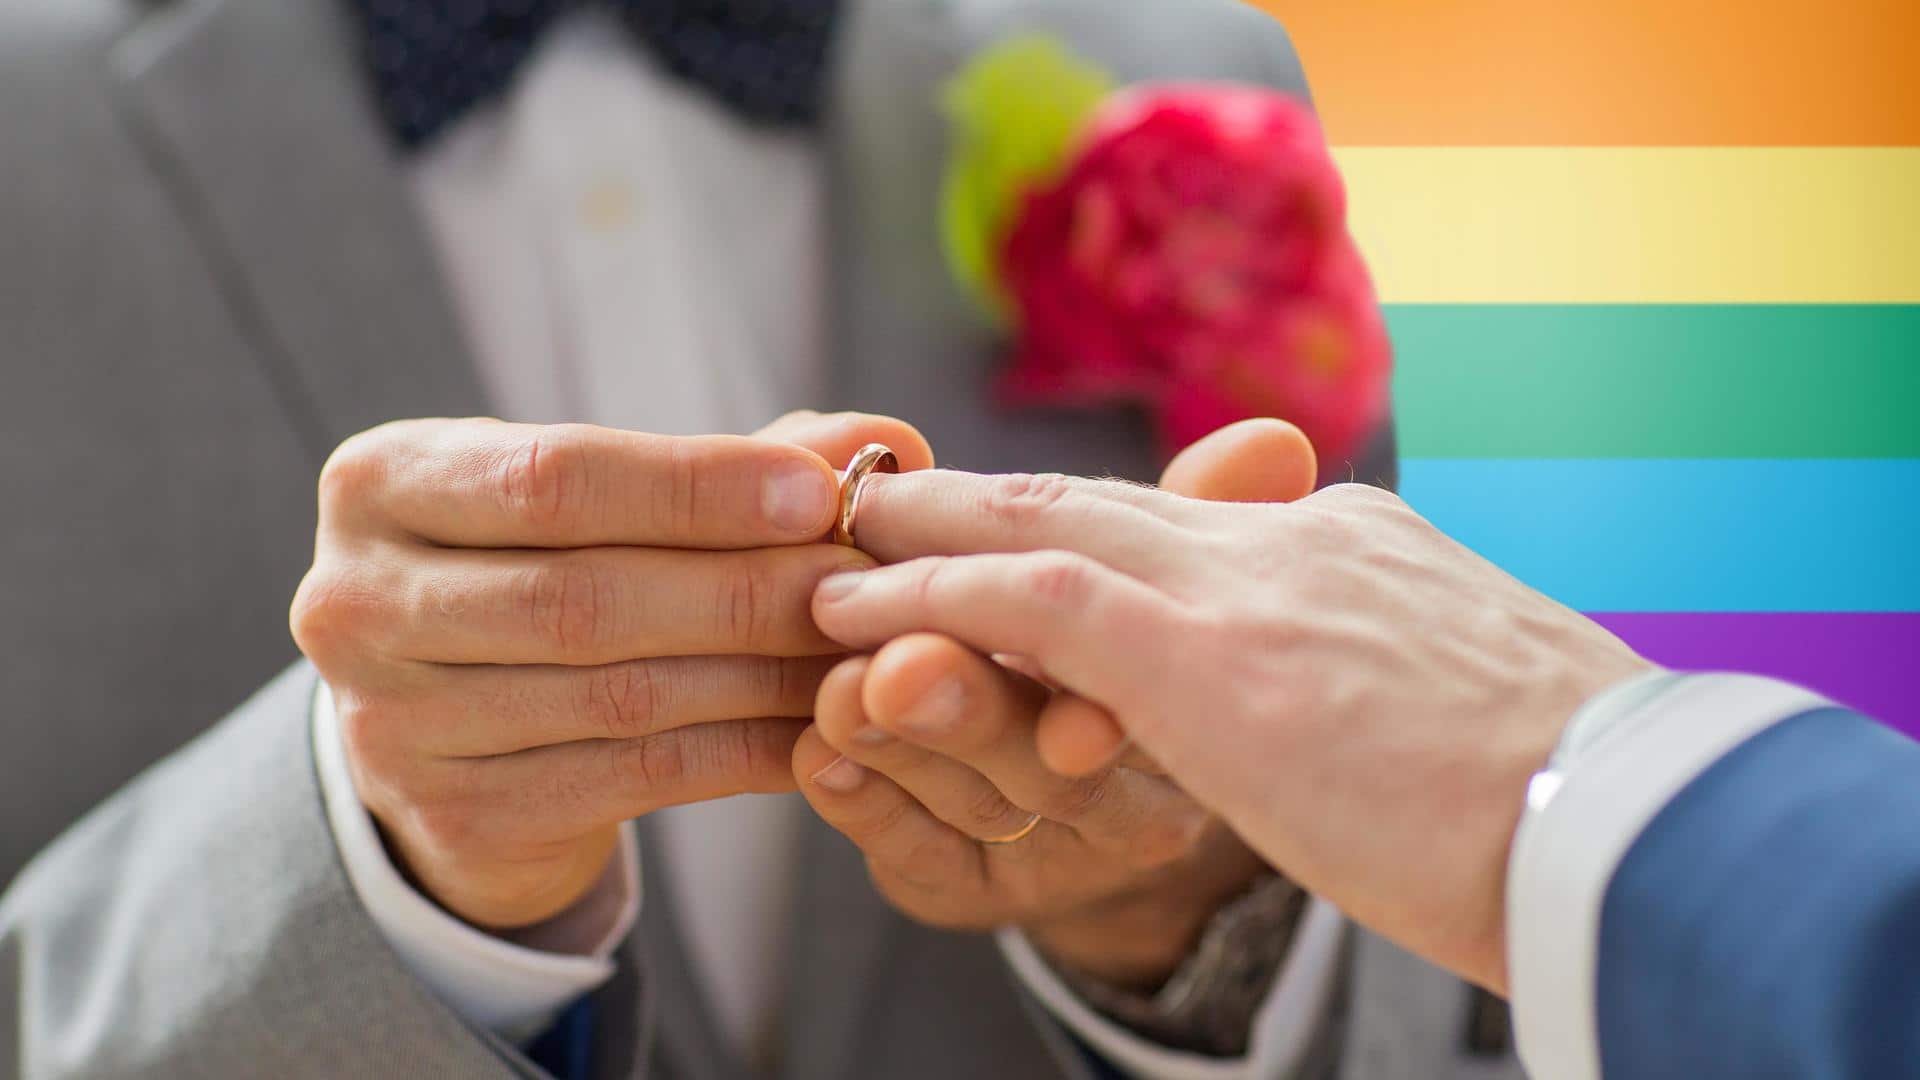 Equality for all: Countries where same-sex marriage is legal